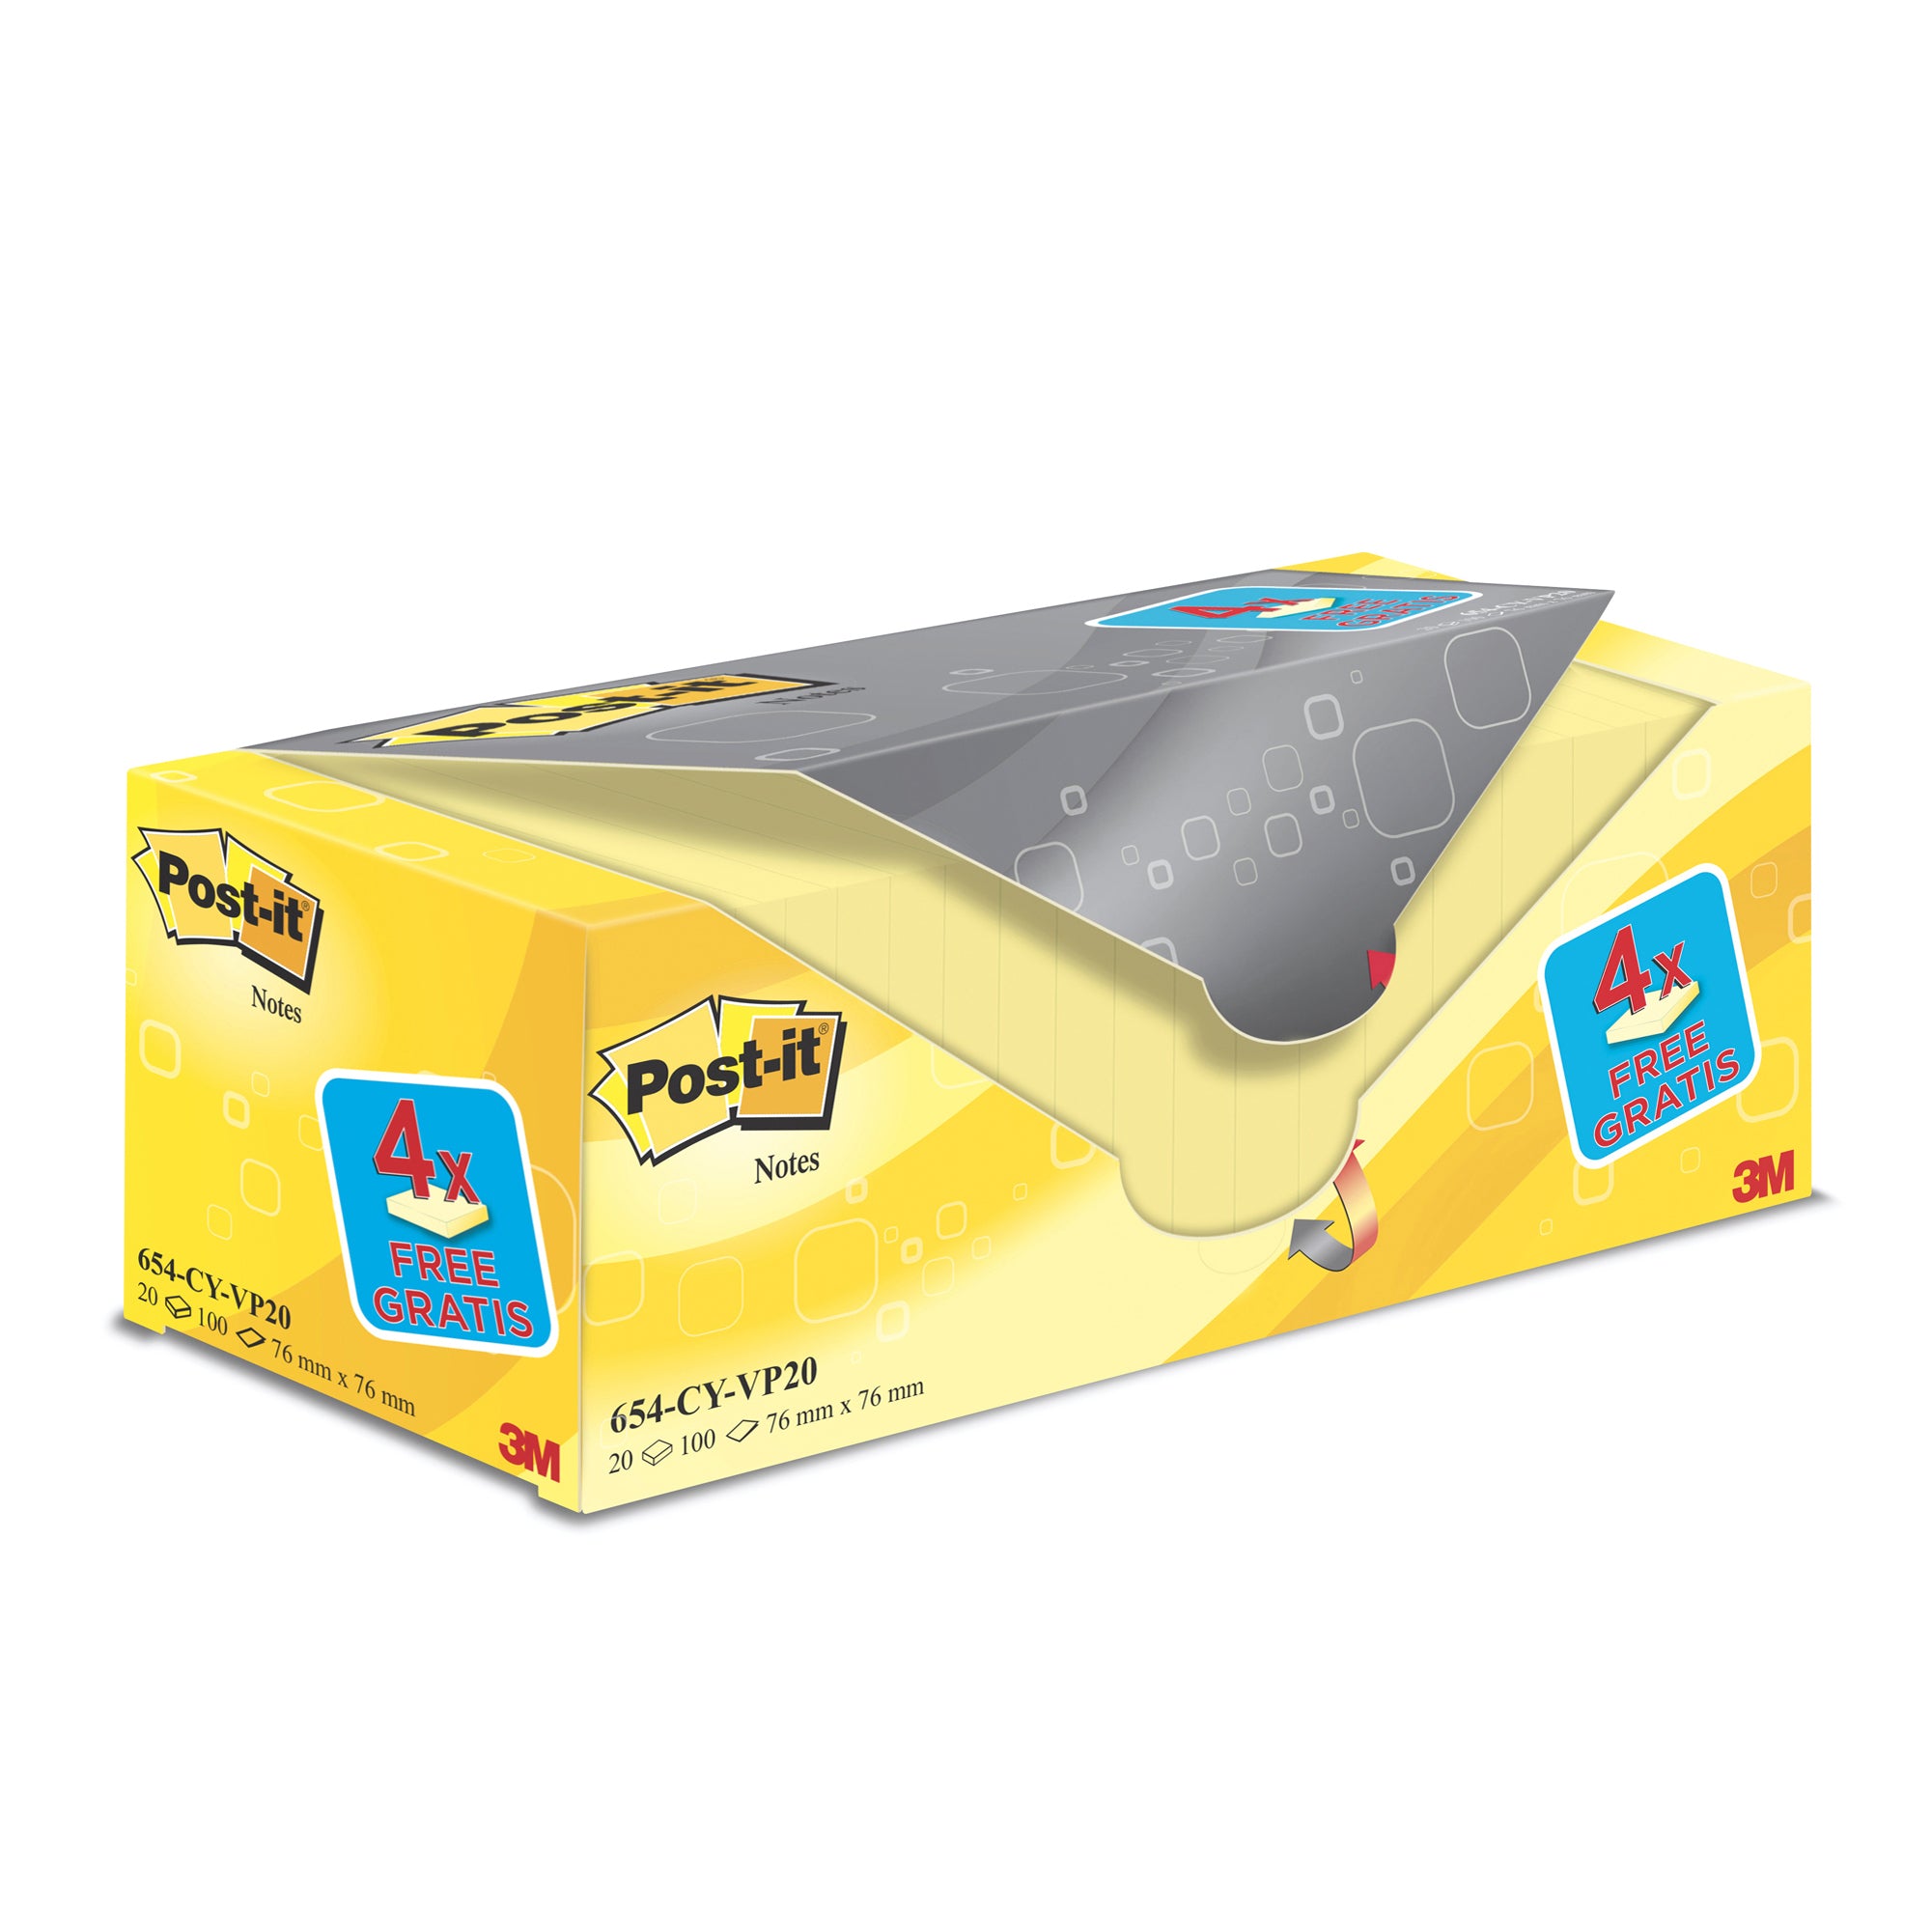 post-it-value-pack-164-blocco-100fg-giallo-canary-76x76mm-72gr-654cy-vp20